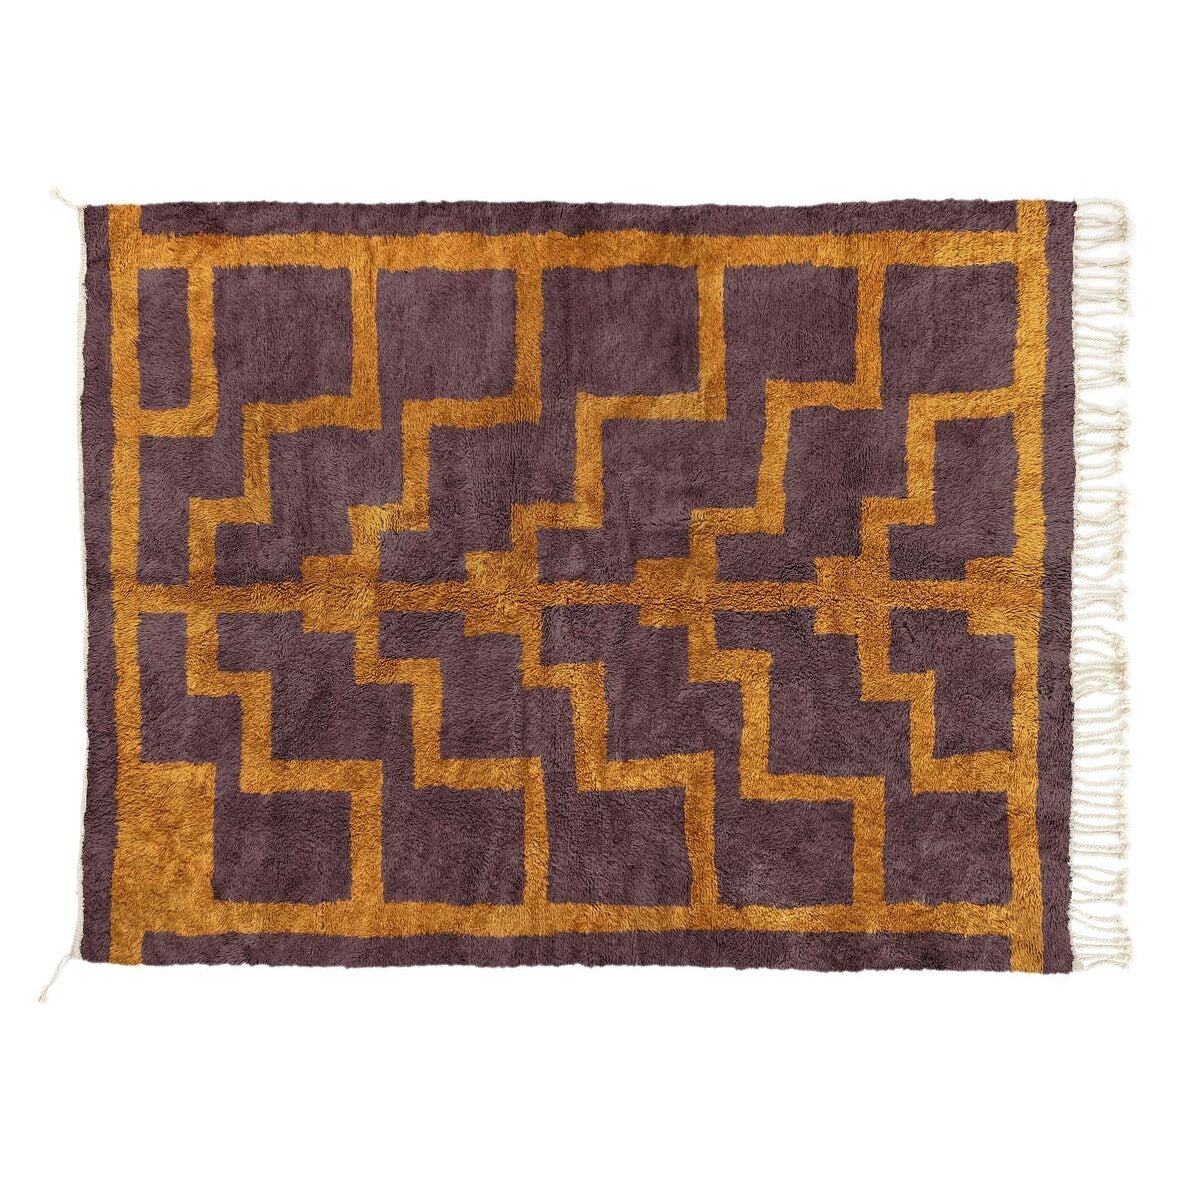 The Standout Rug in This New ’70s-Inspired Collab Is the Shaggiest of Them All